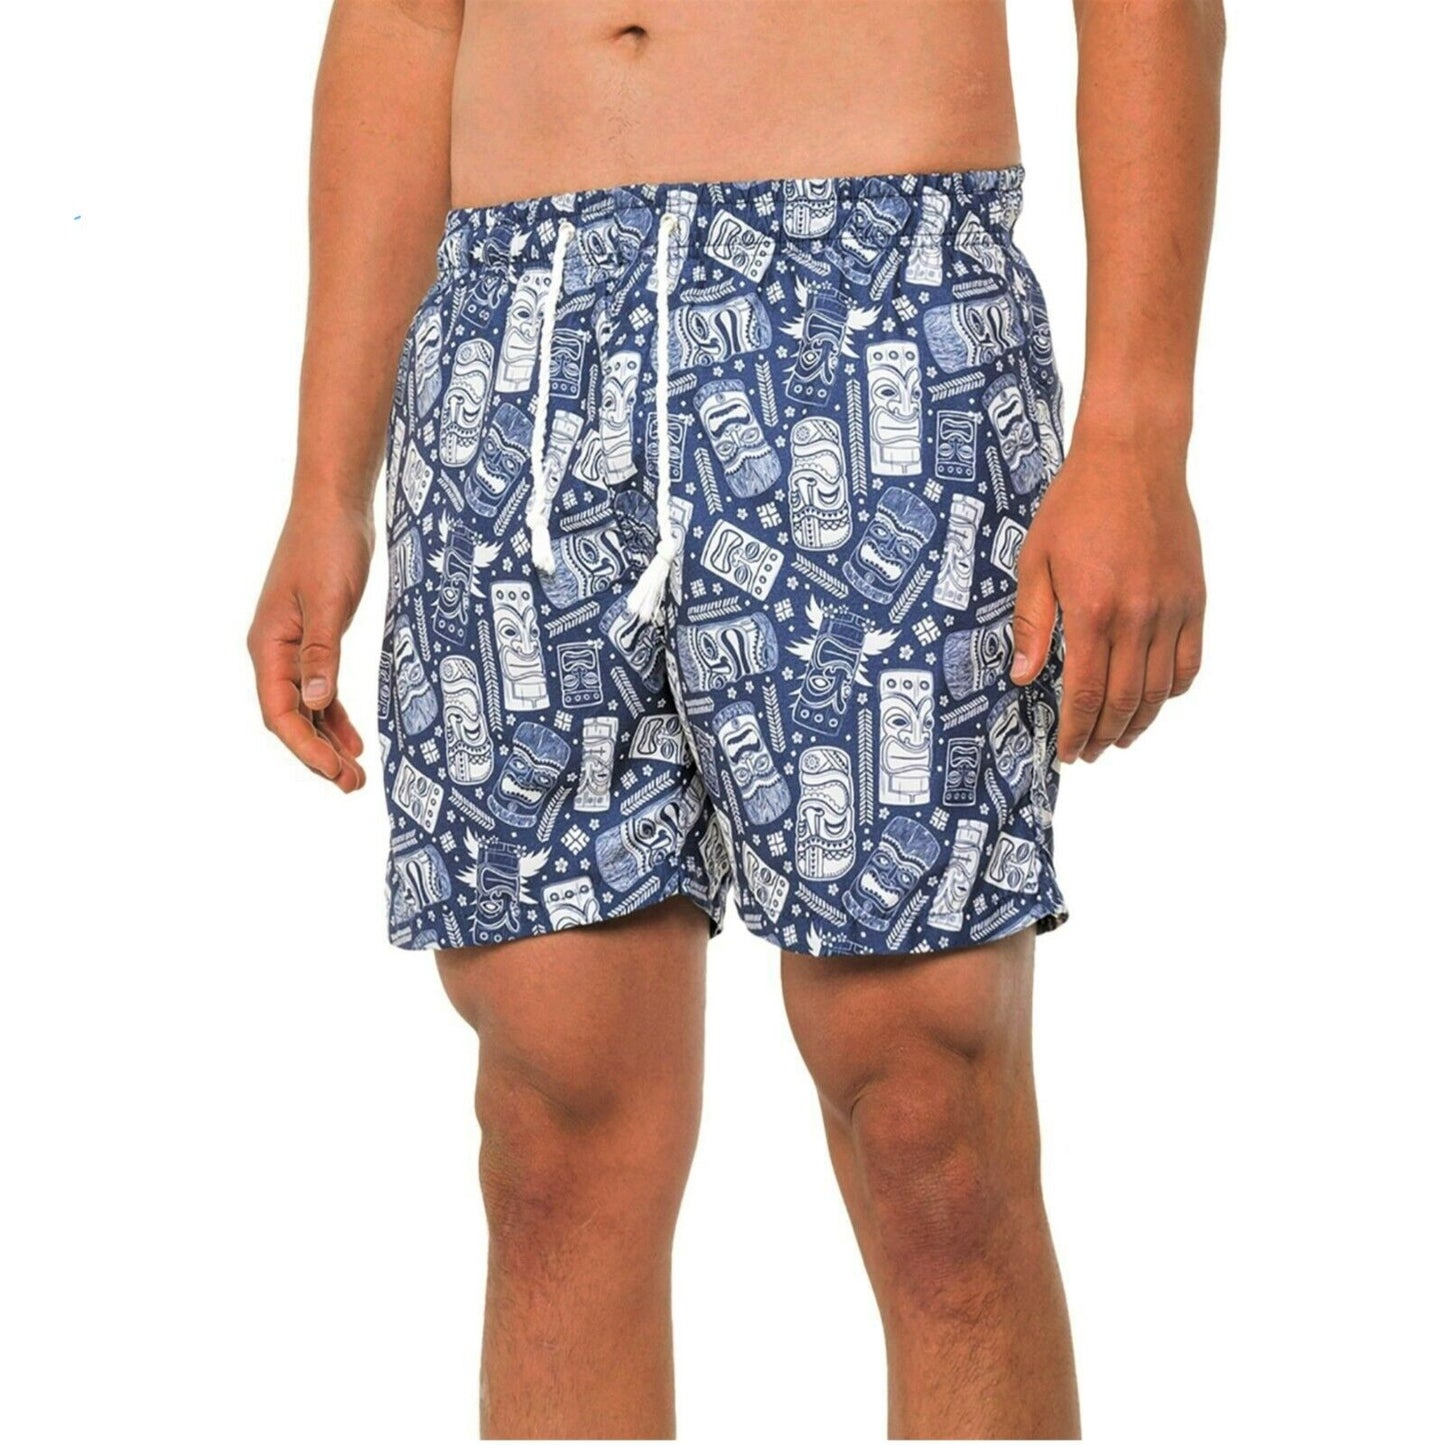 NWT Ingear Printed Quick Drying Built-In Brief Pockets Swim Trunks Shorts  S,M,L